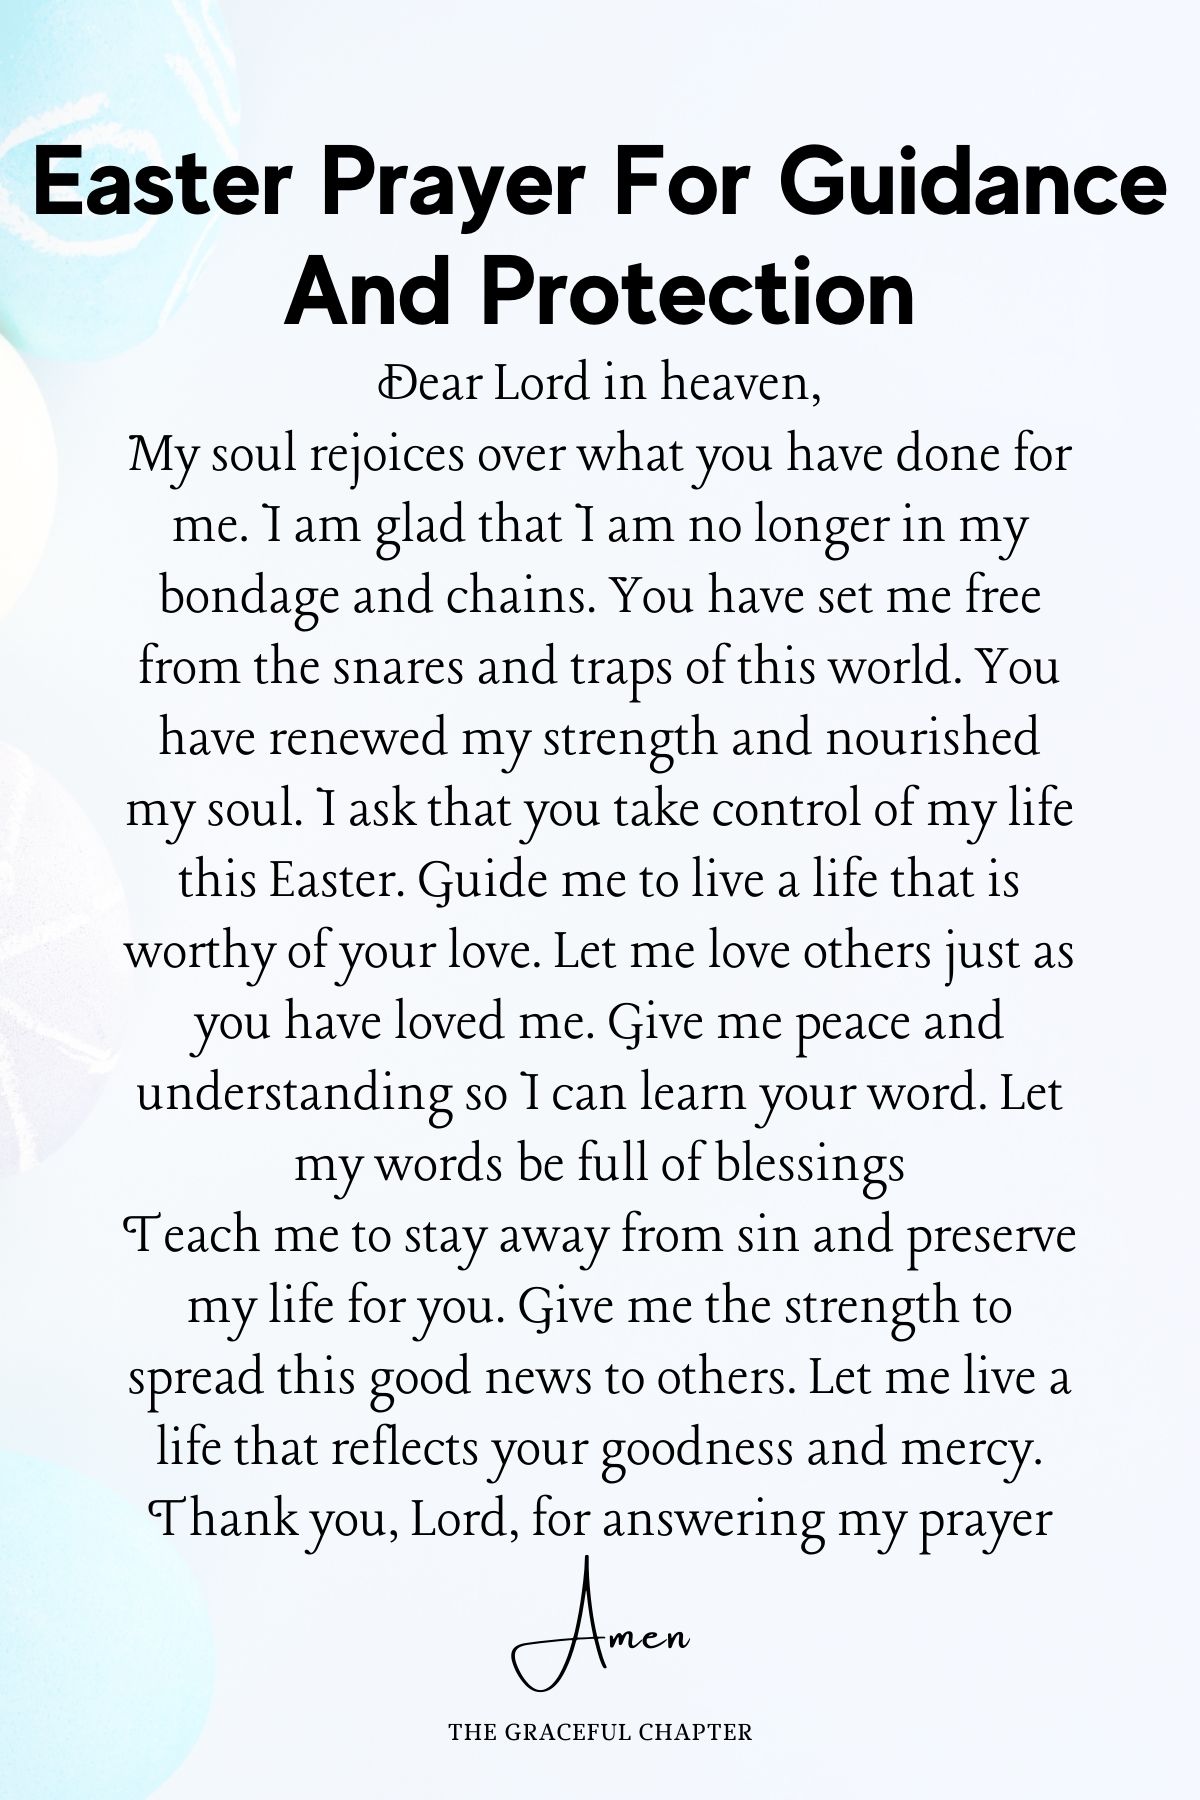 Easter prayer for guidance and protection